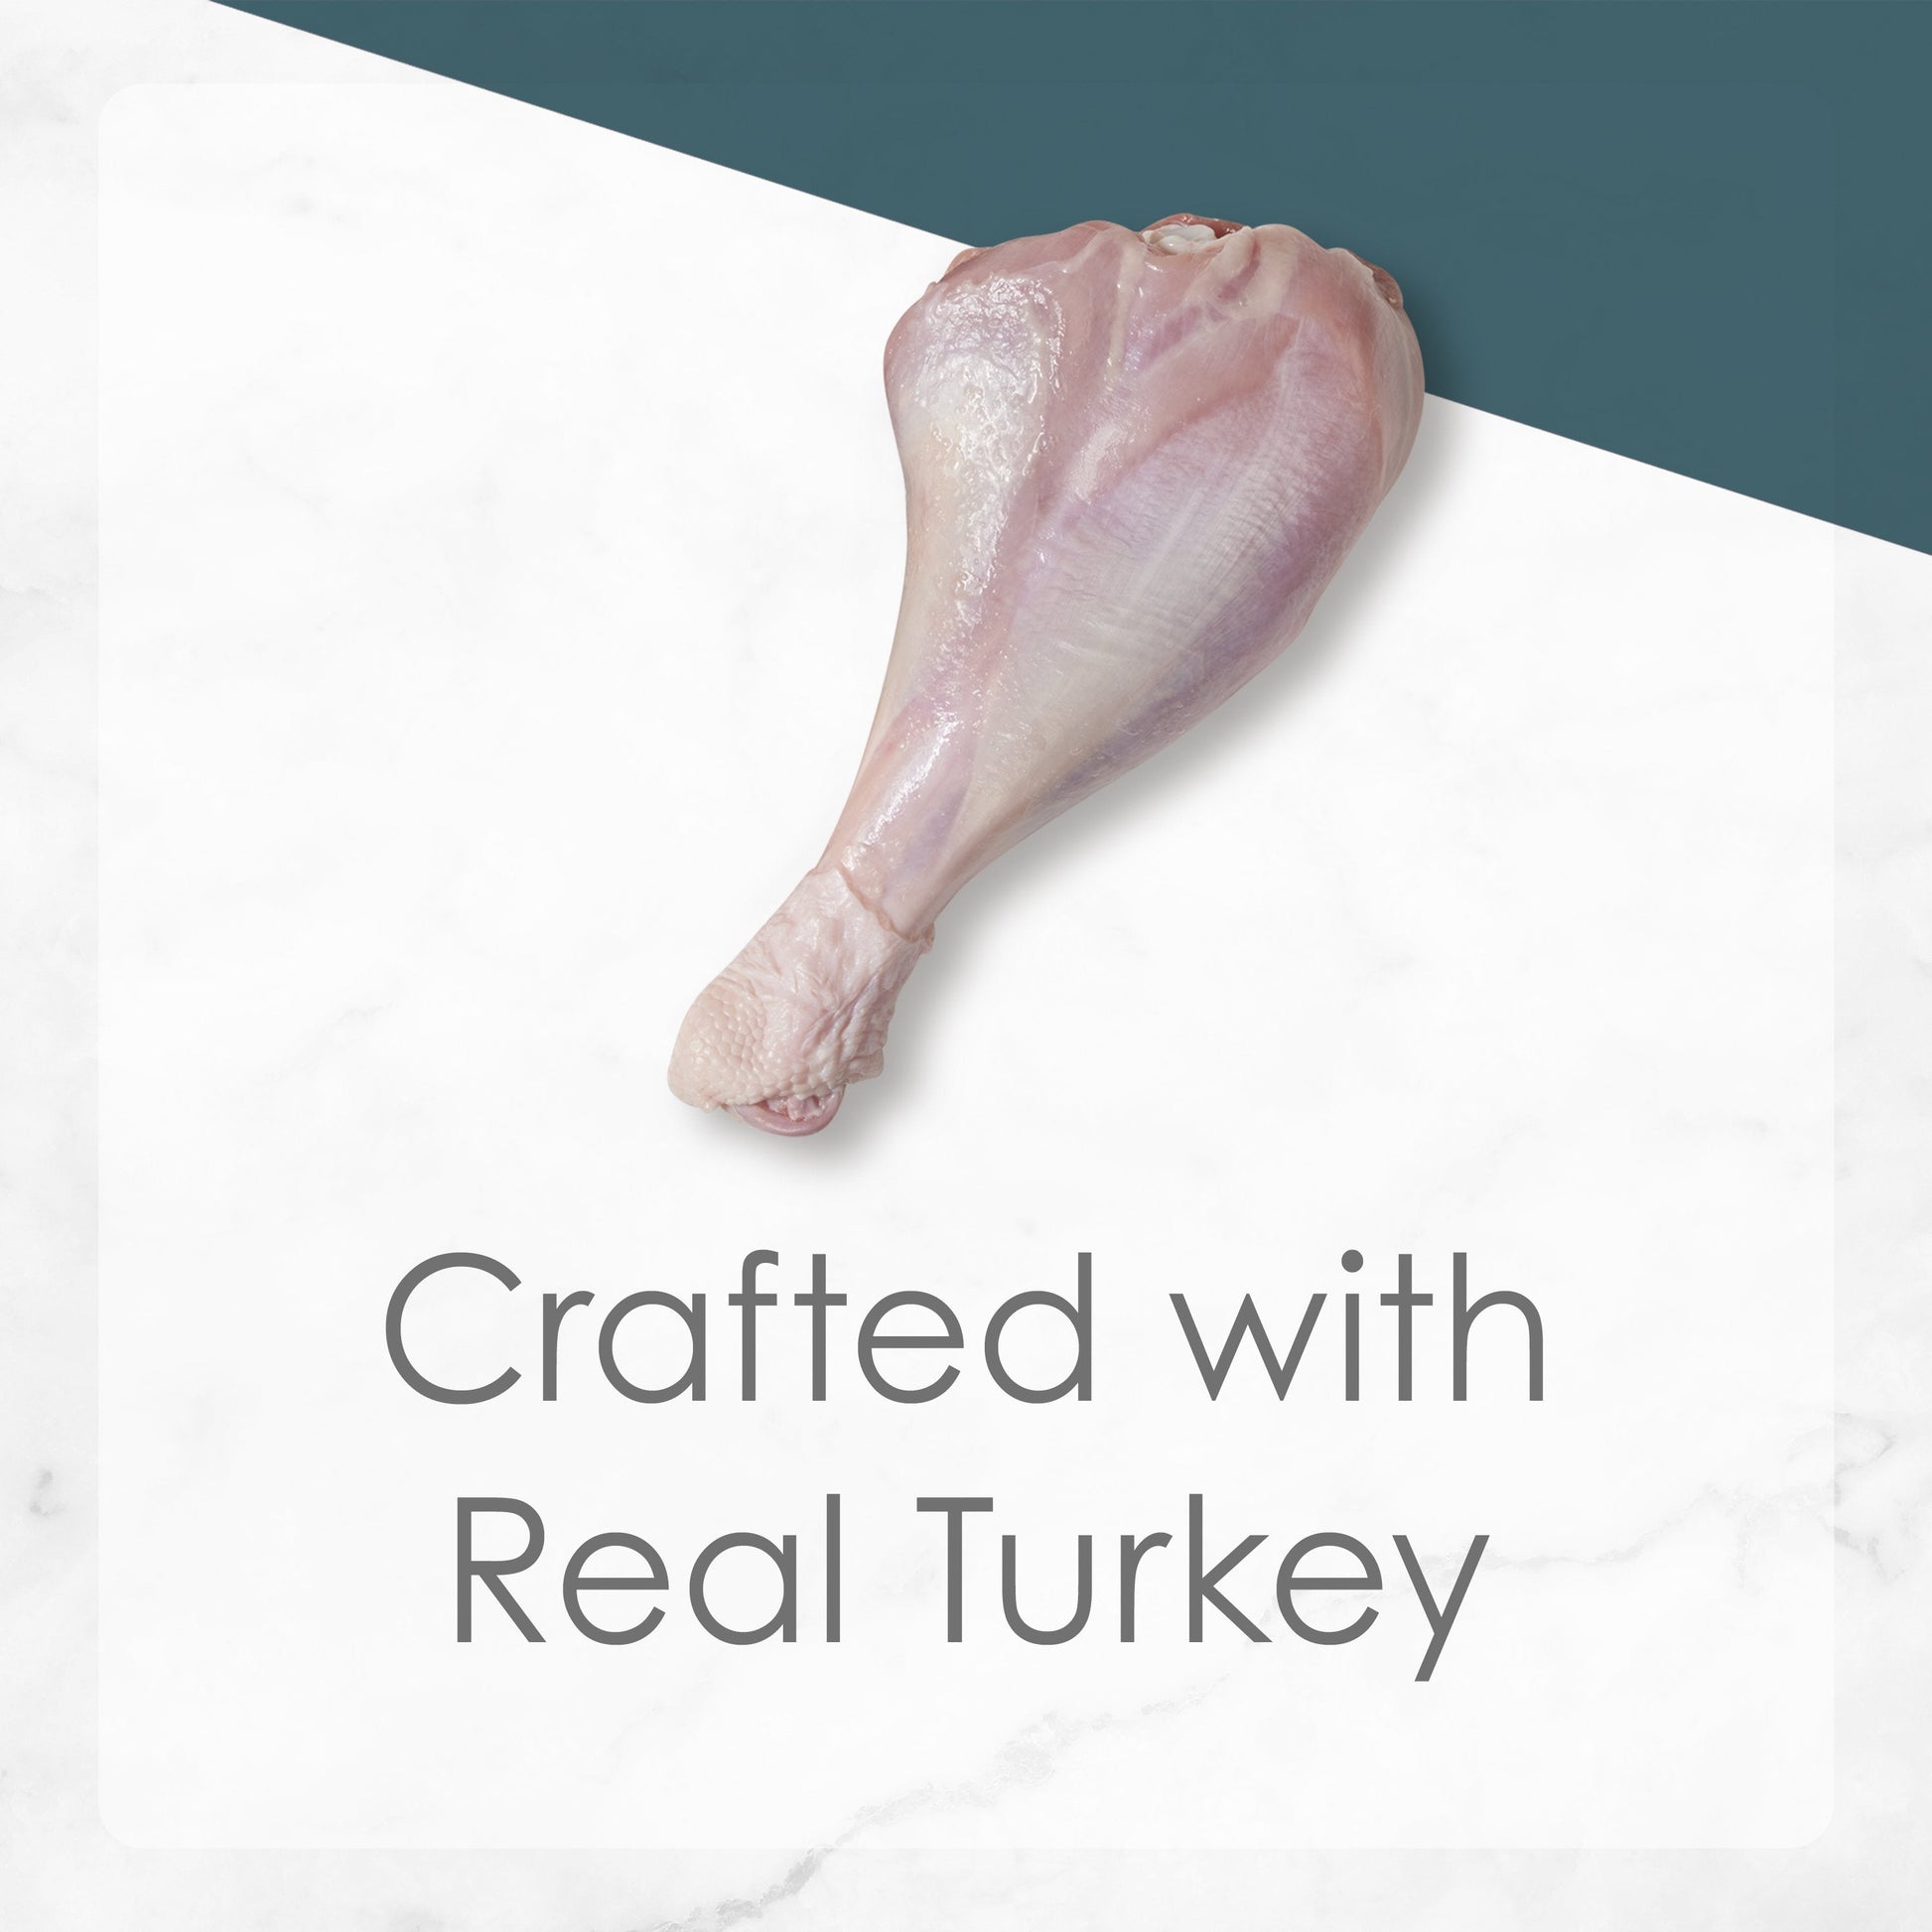 Crafted with real turkey